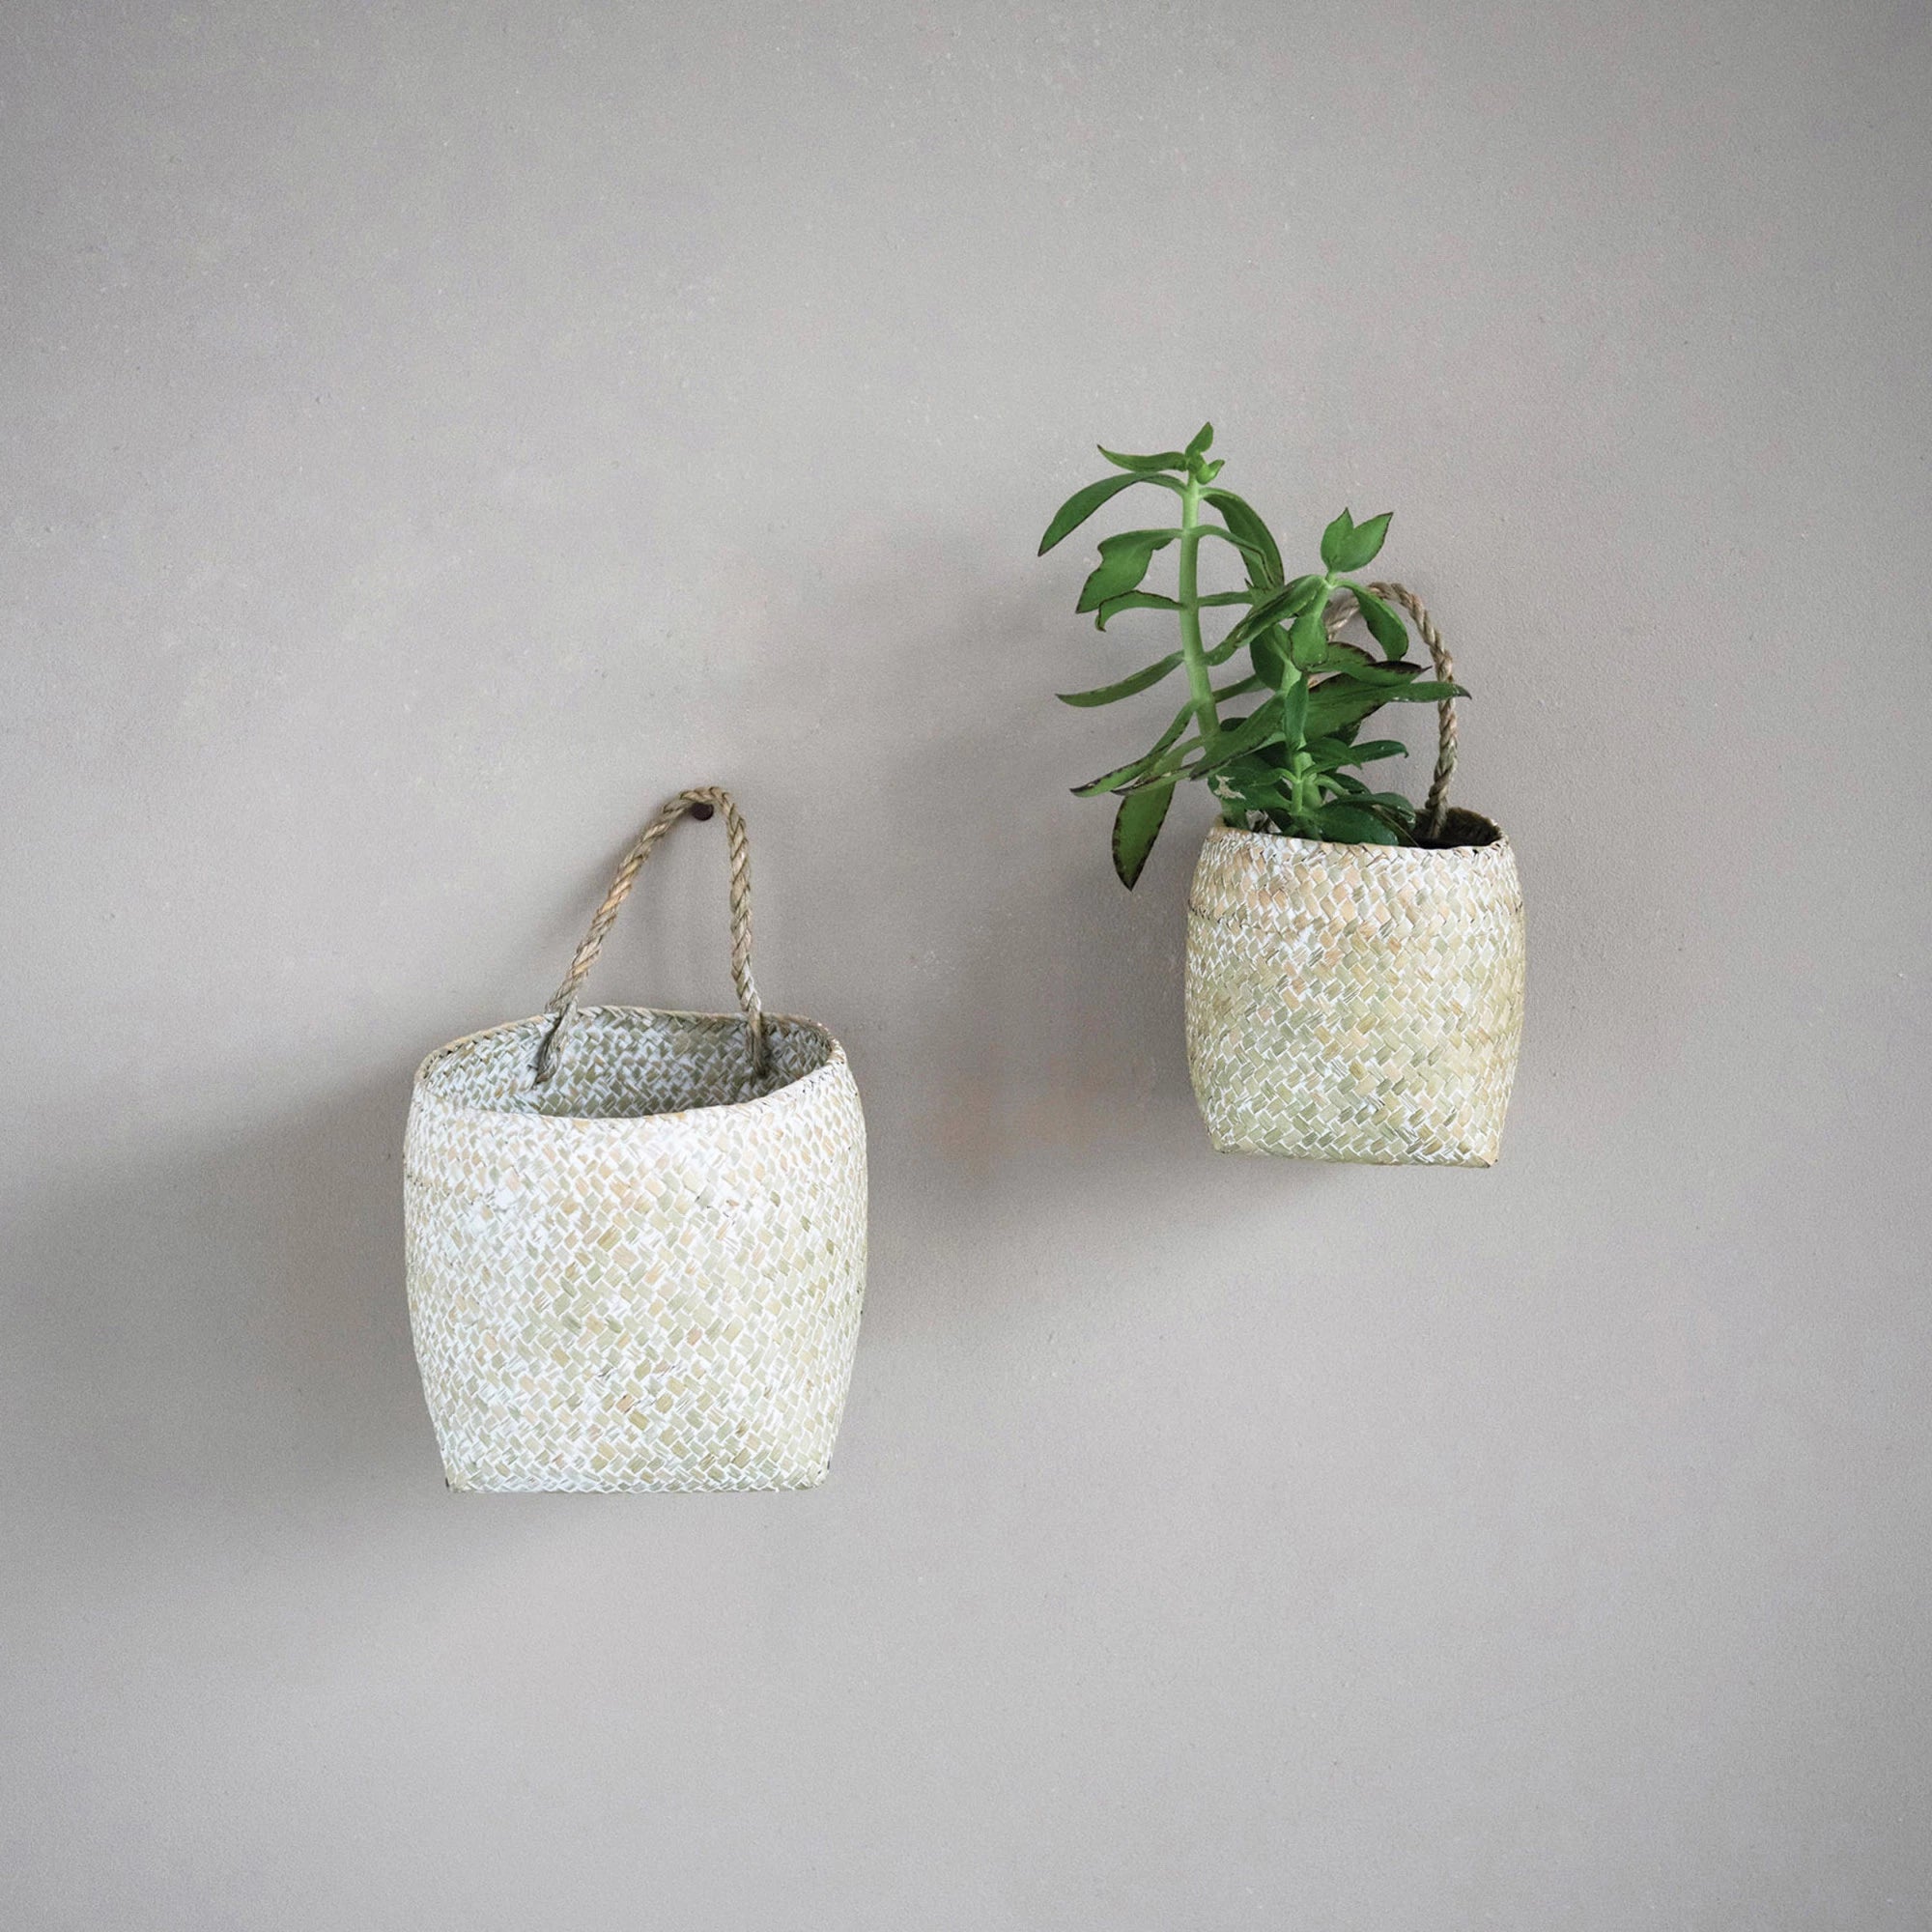 Hand-Woven Wall Baskets with Handles - (small or large)